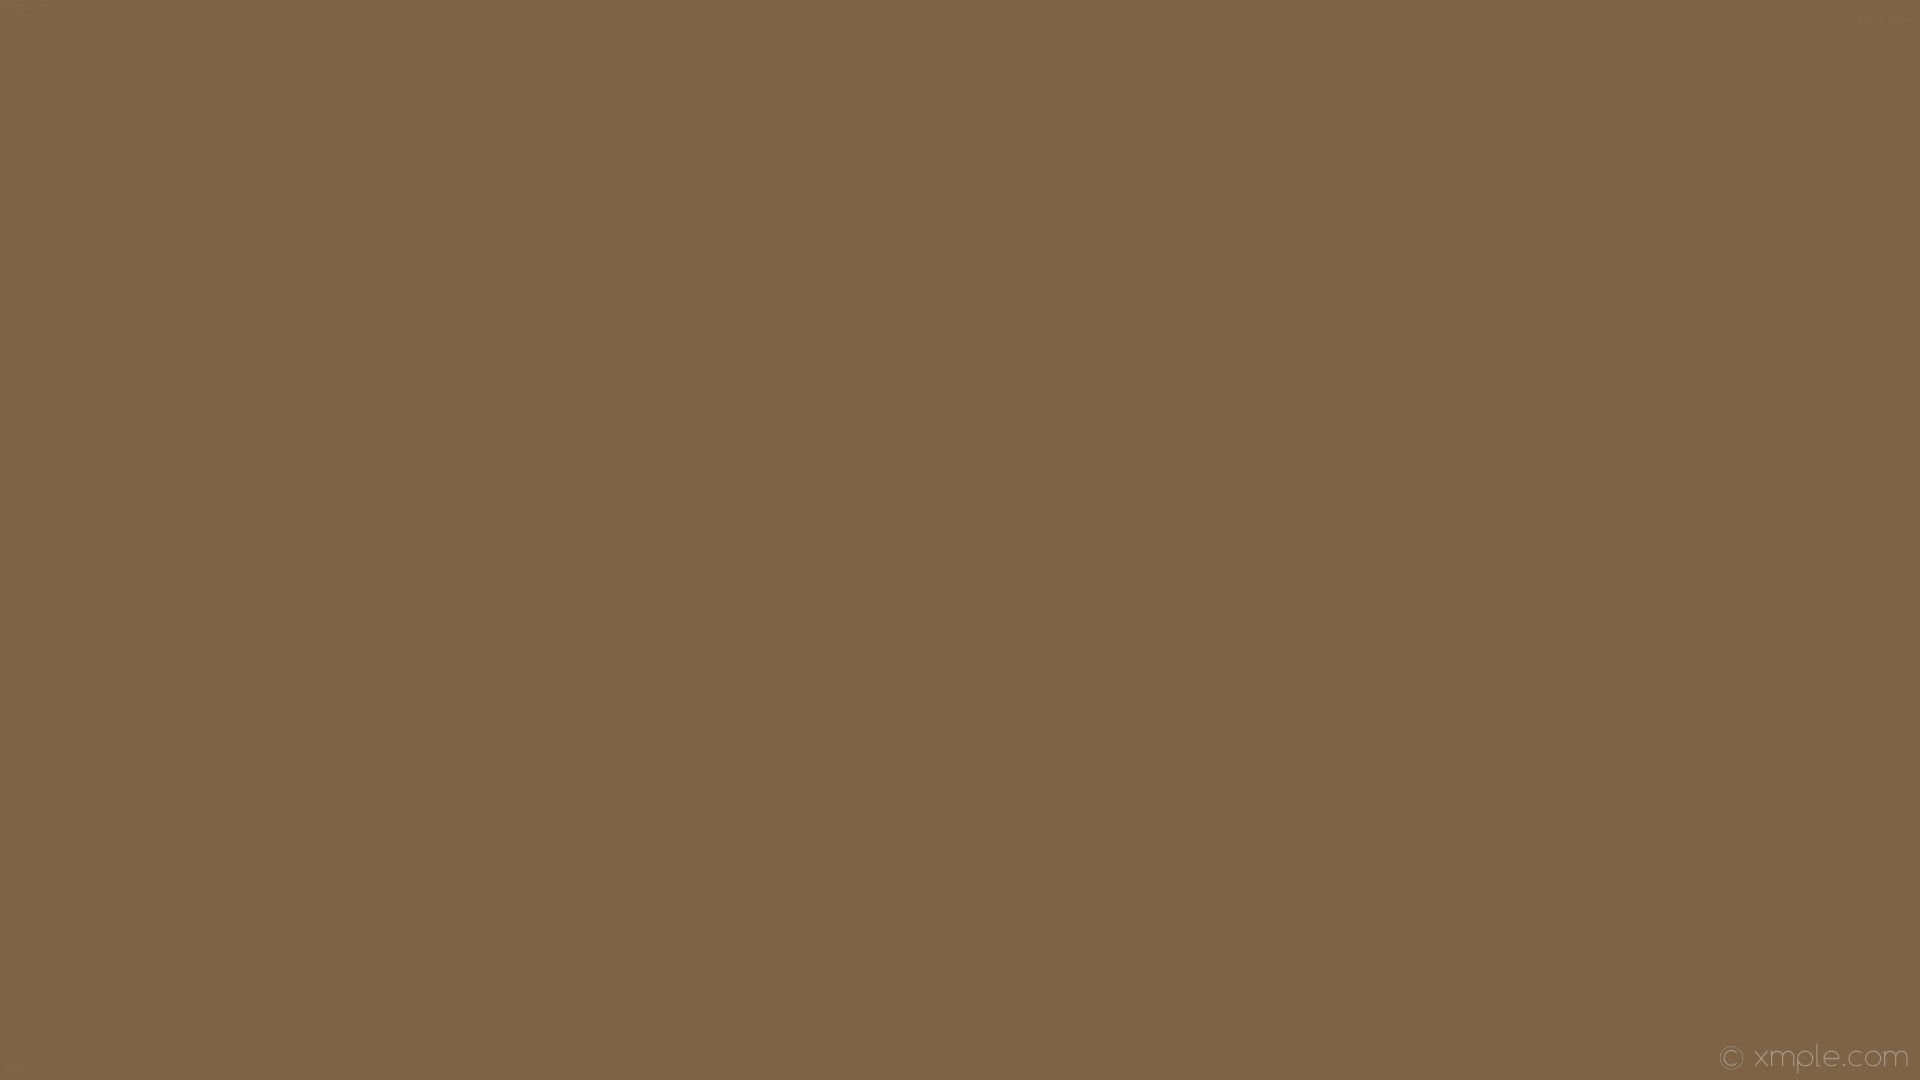 Solid Brown Wallpaper Free Solid Brown Background